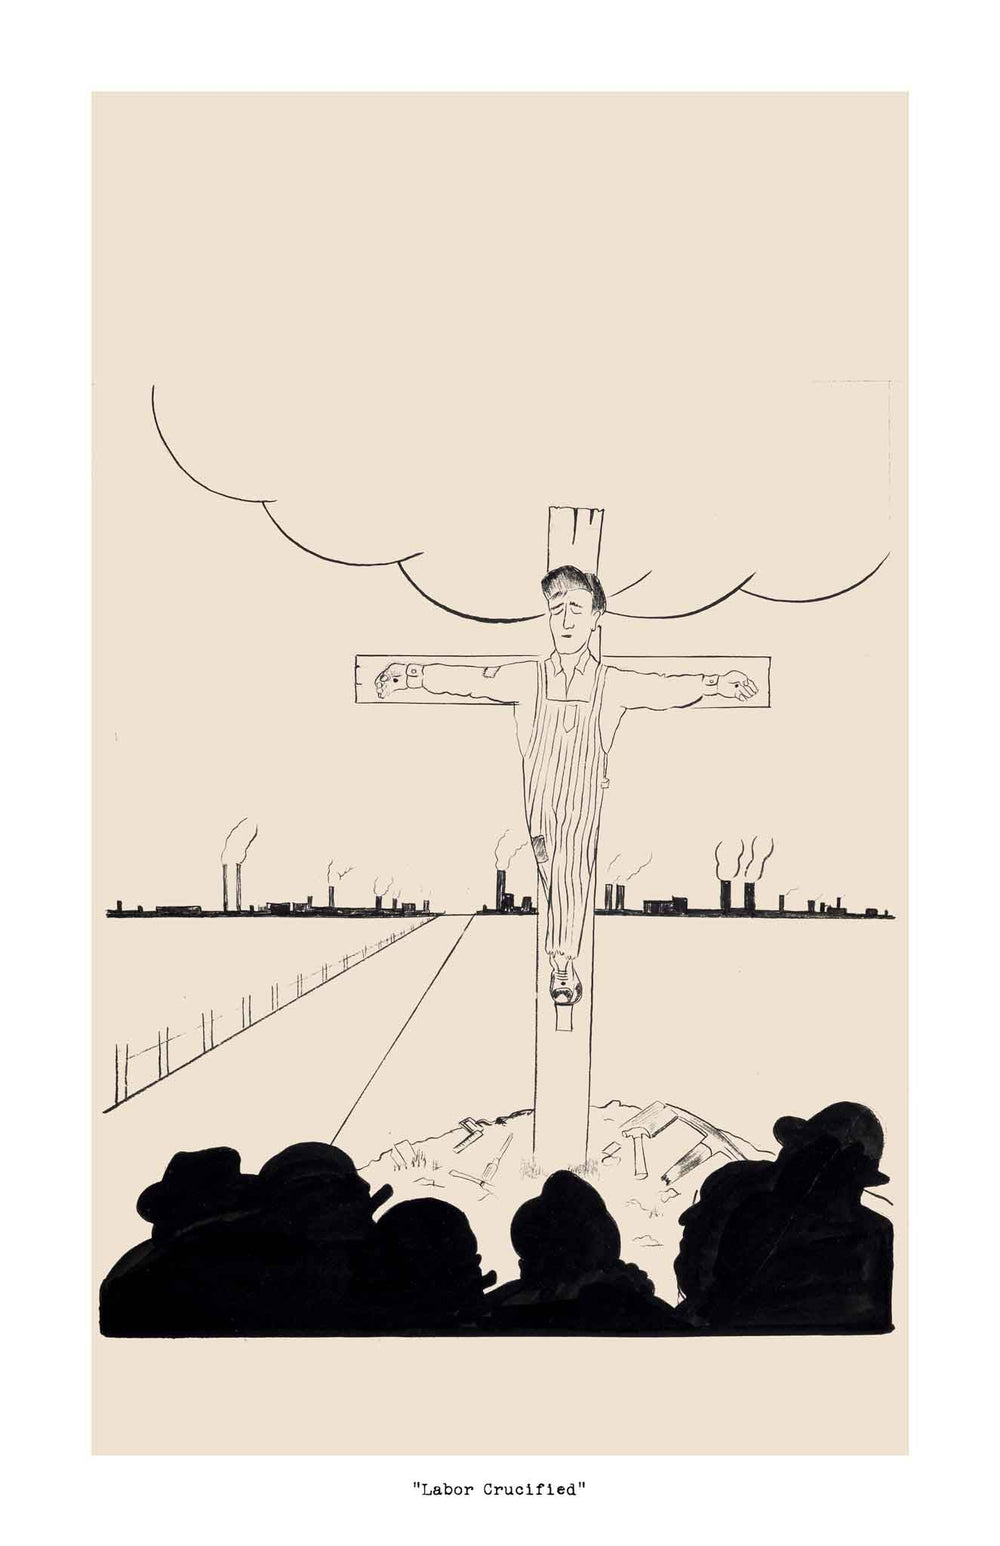 Labor Crucified